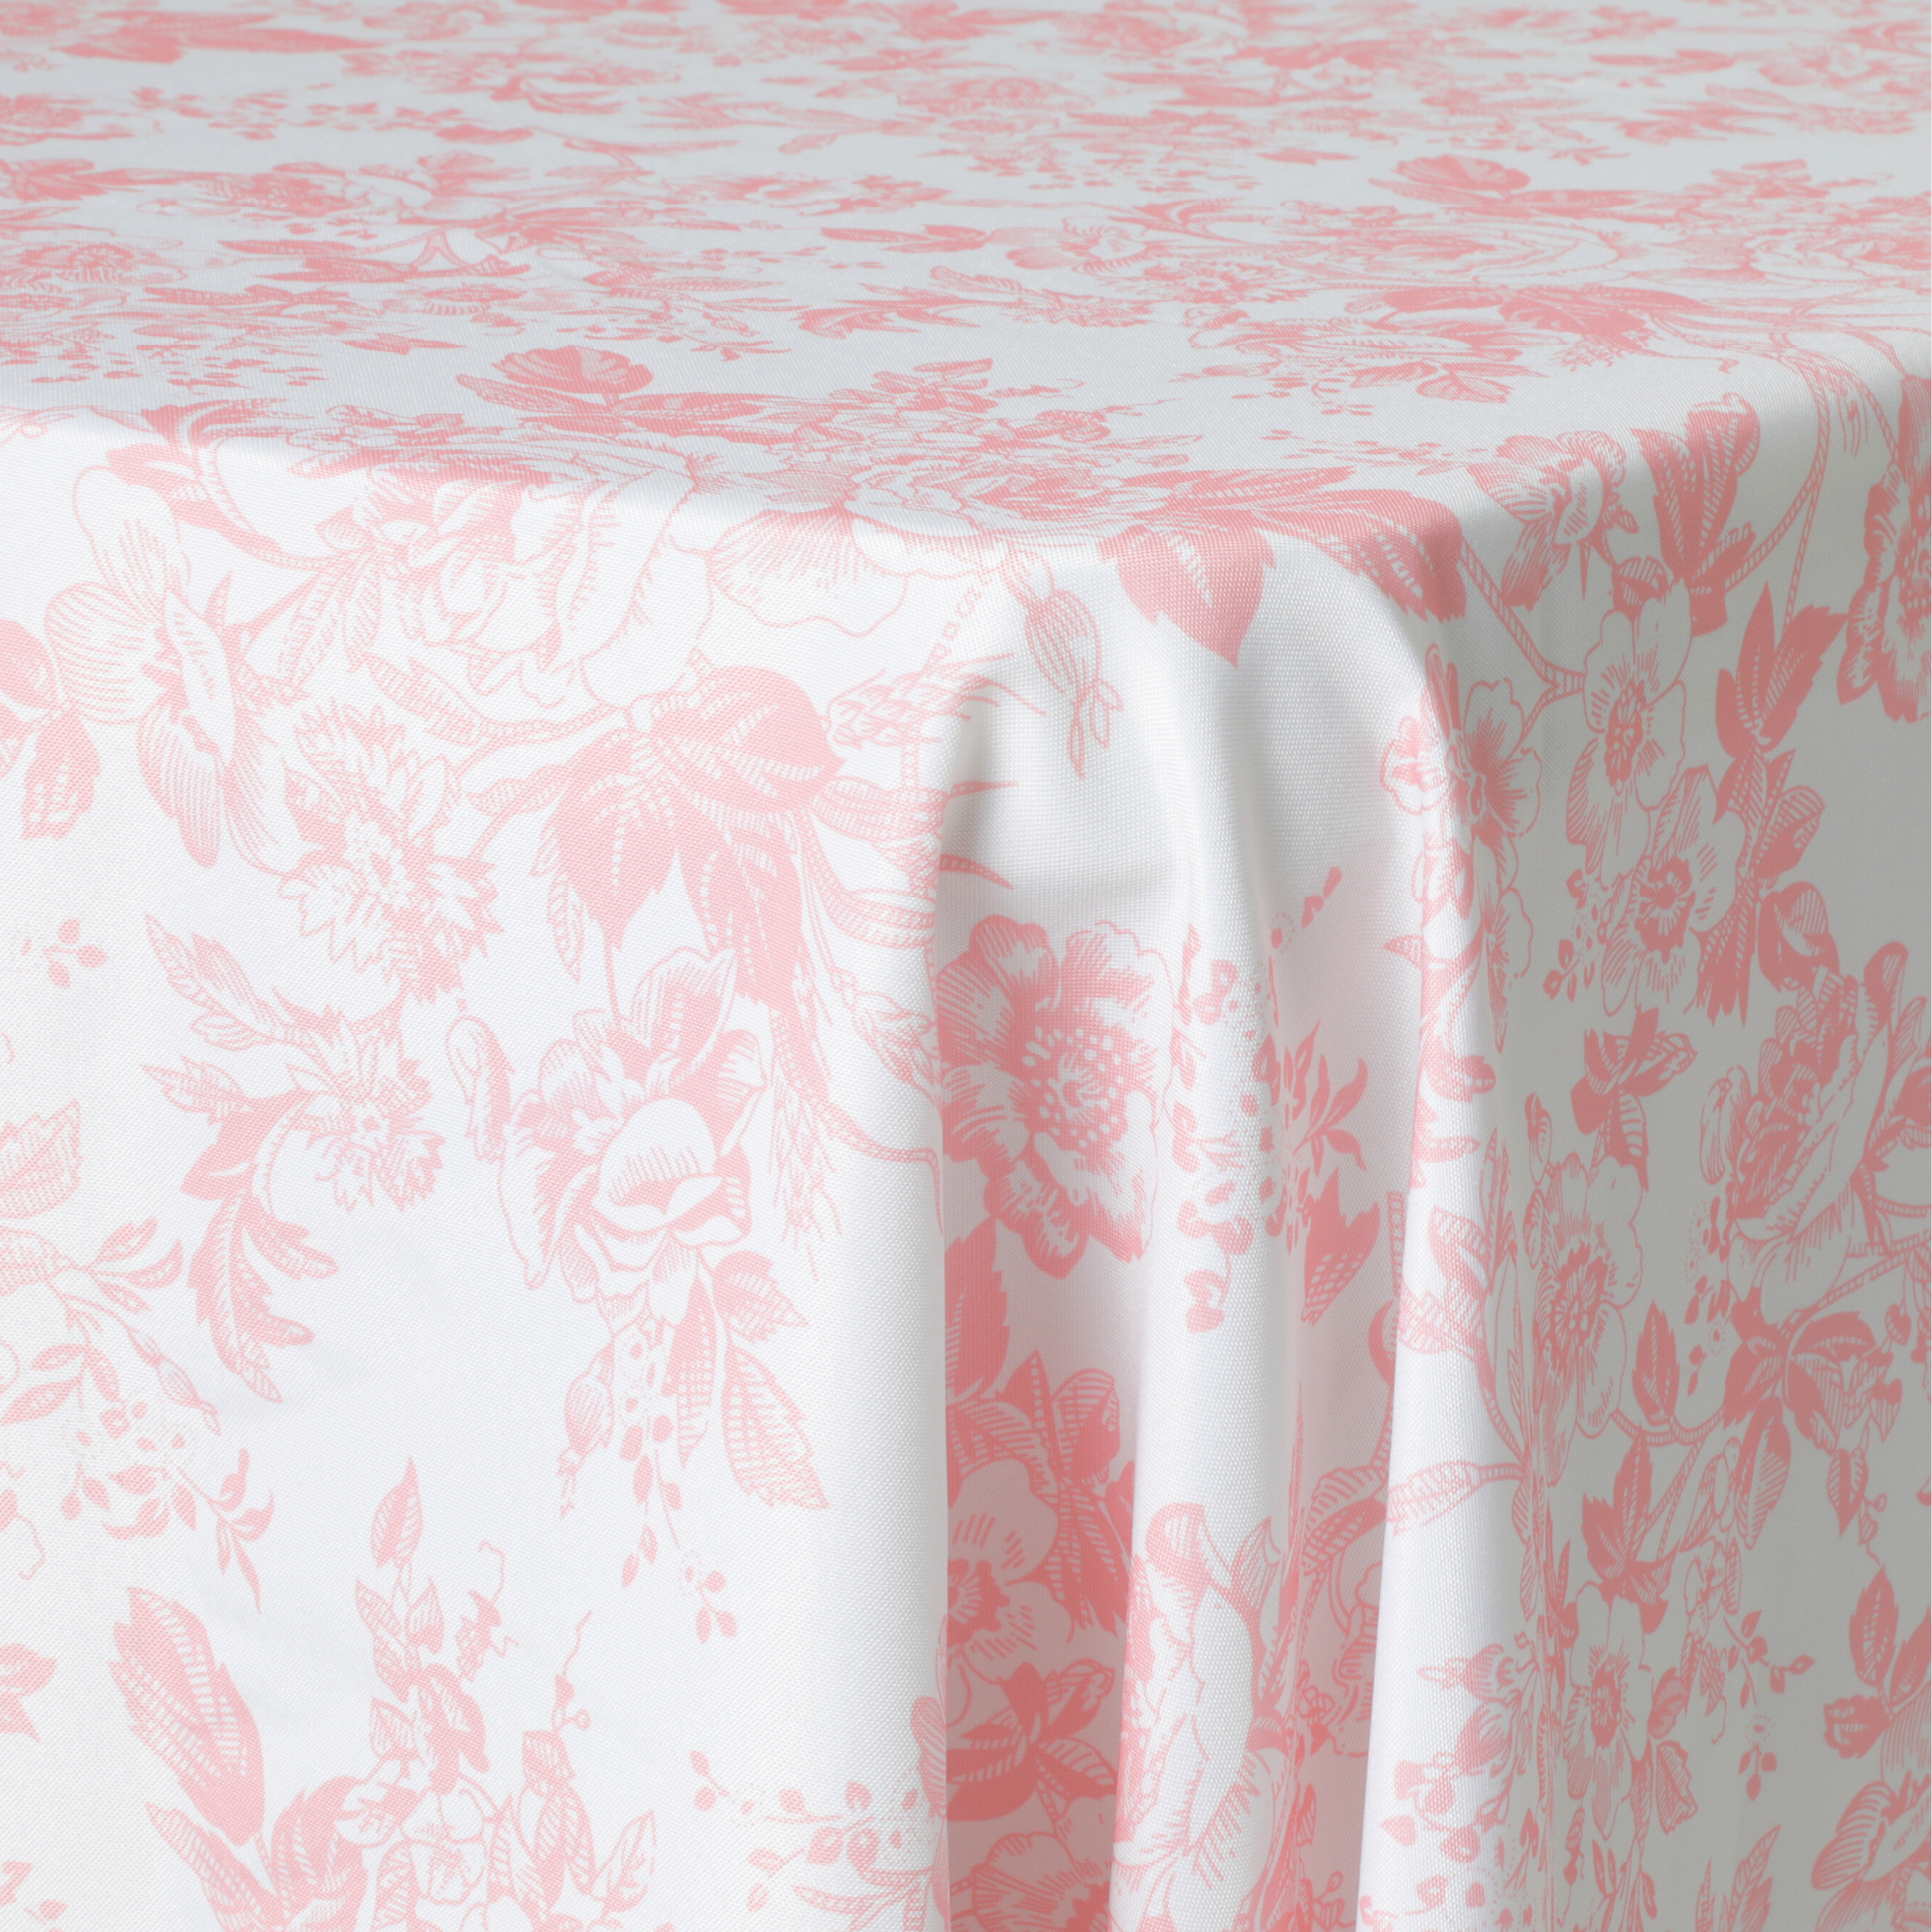 French Toile 60"x120" Rectangular Tablecloth - Coral